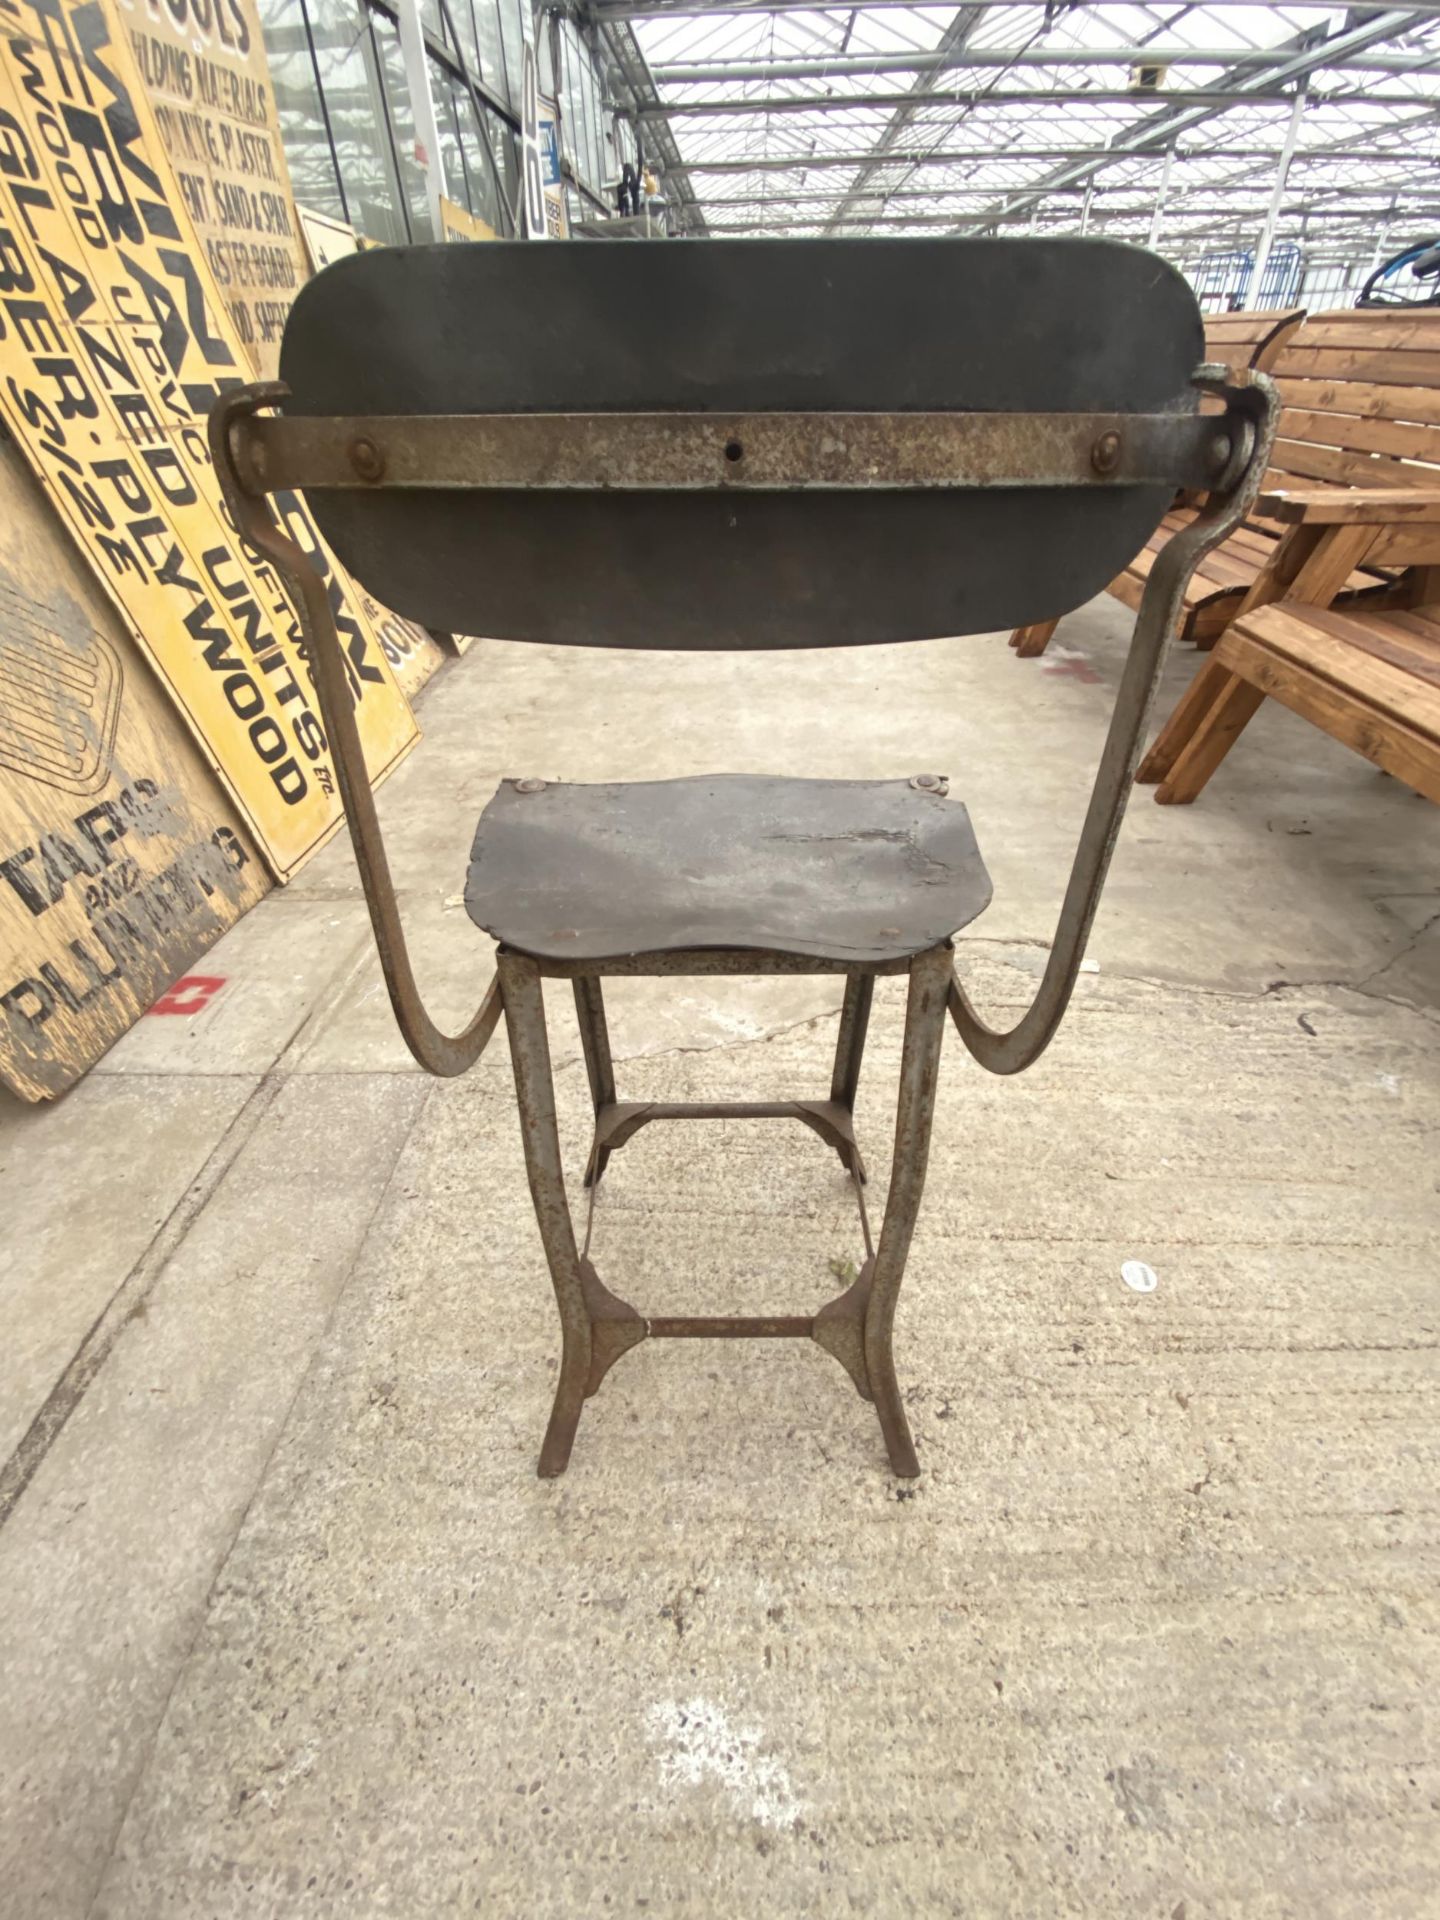 A VINTAGE INDUSTRIAL MACHINISTS CHAIR - Image 3 of 3